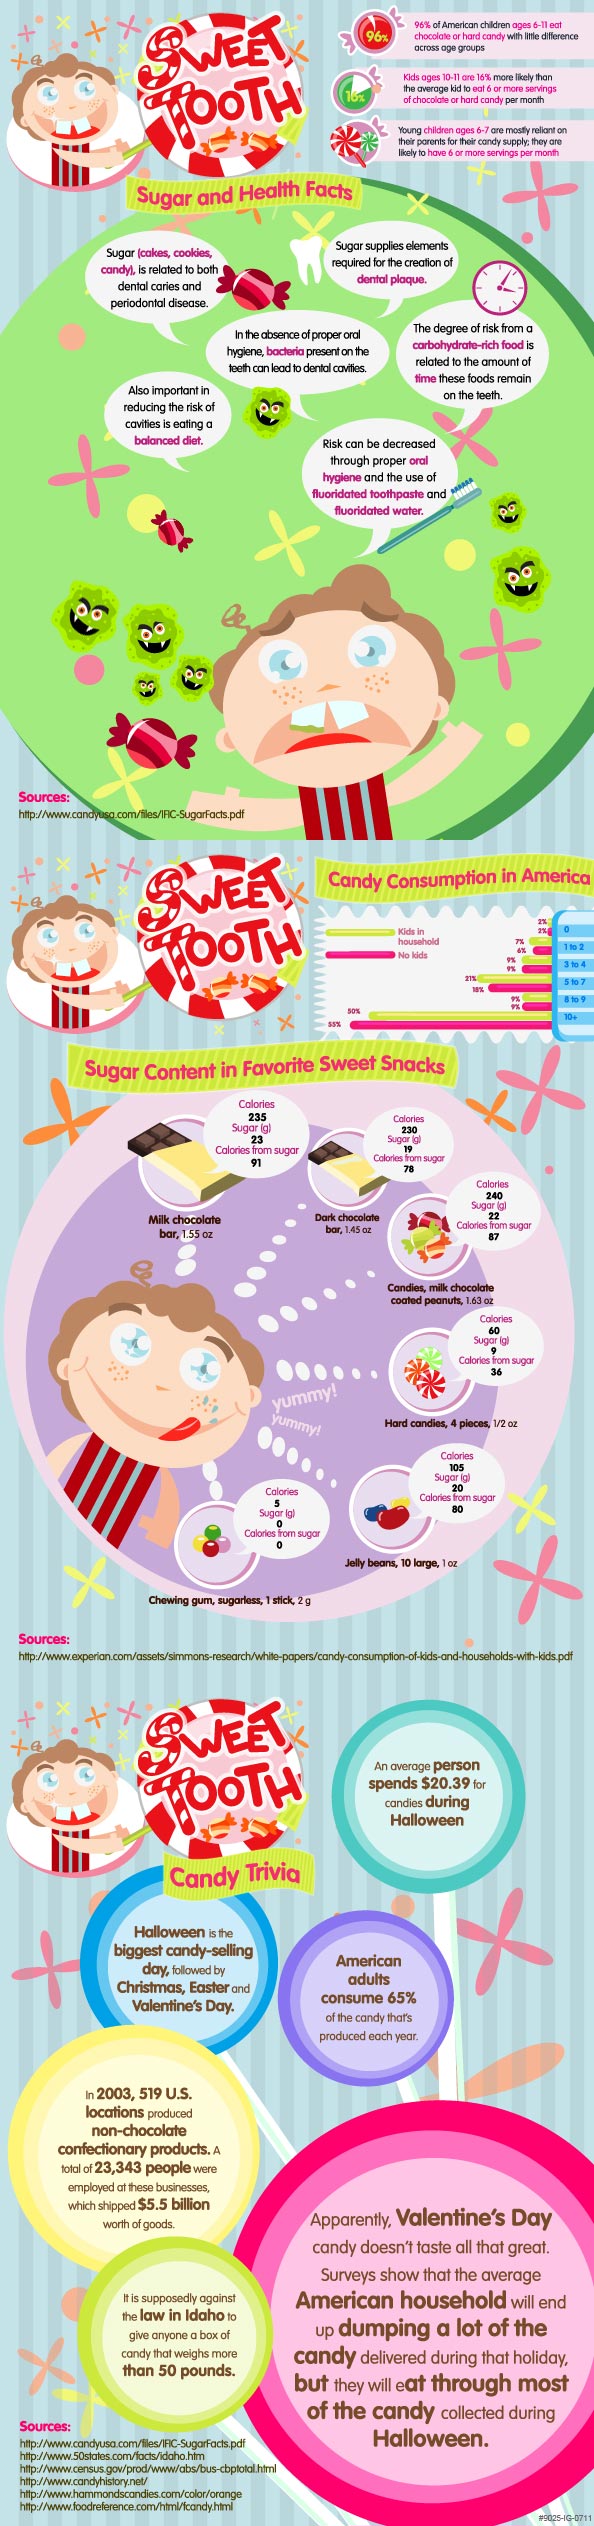 sweet tooth facts